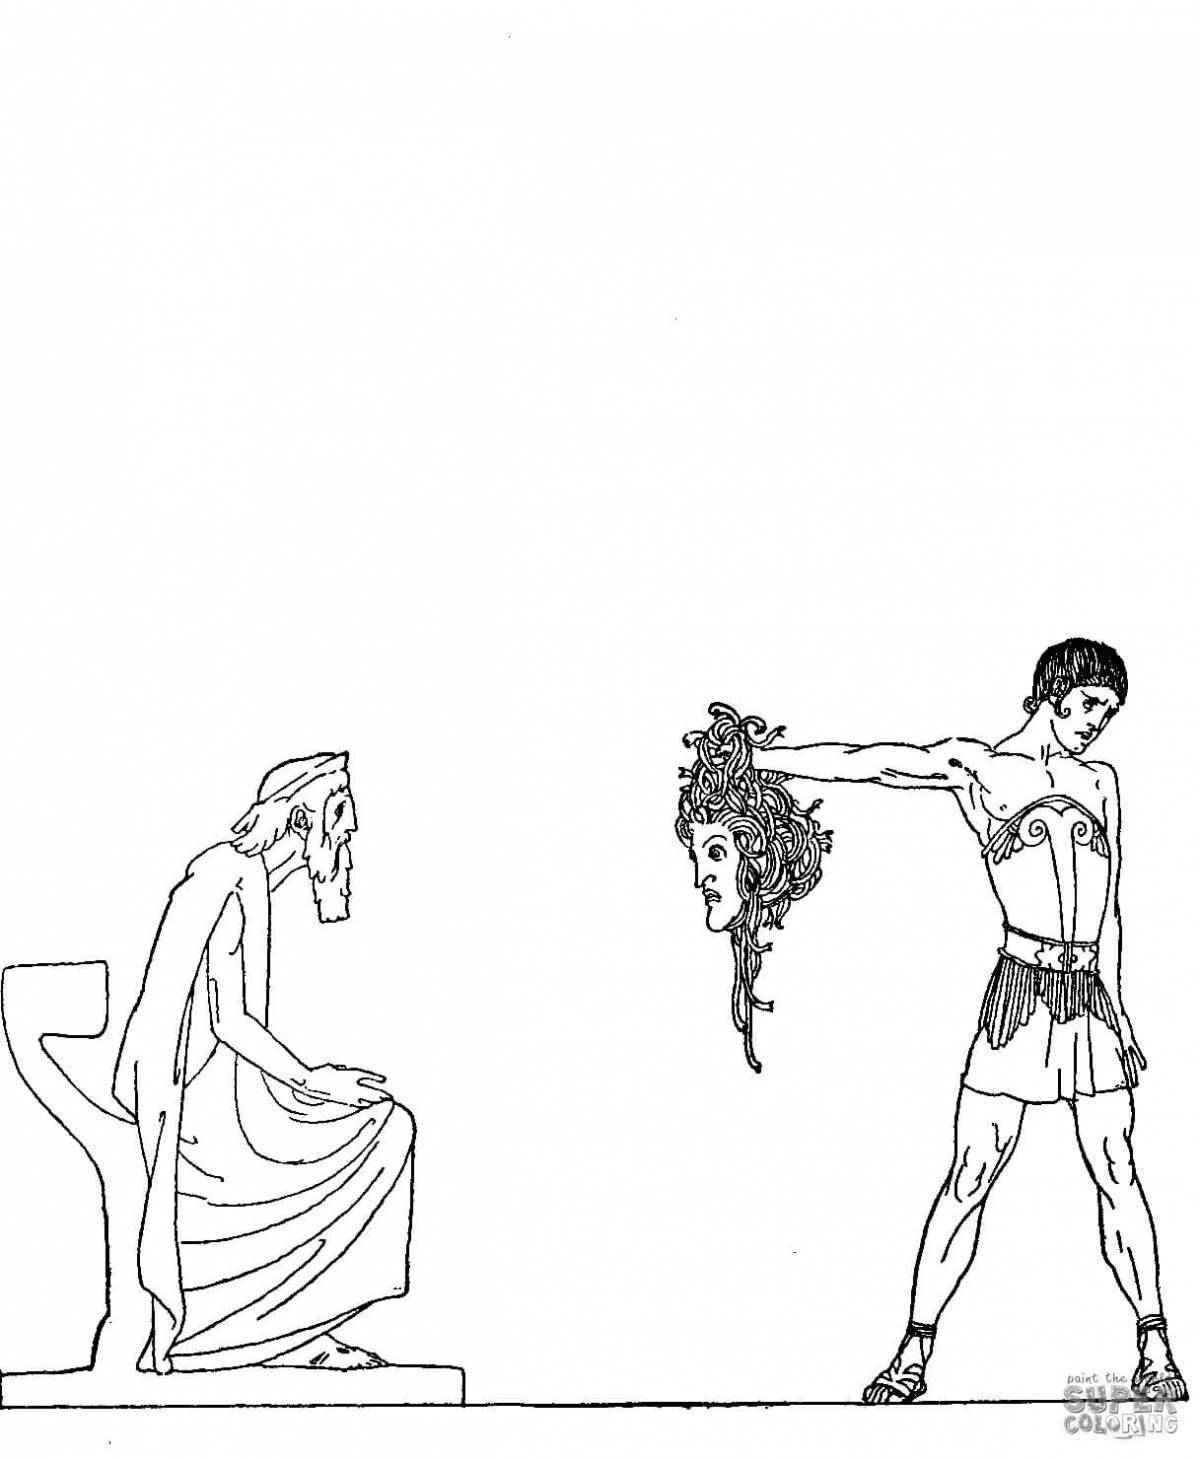 Charming orpheus and eurydice coloring book